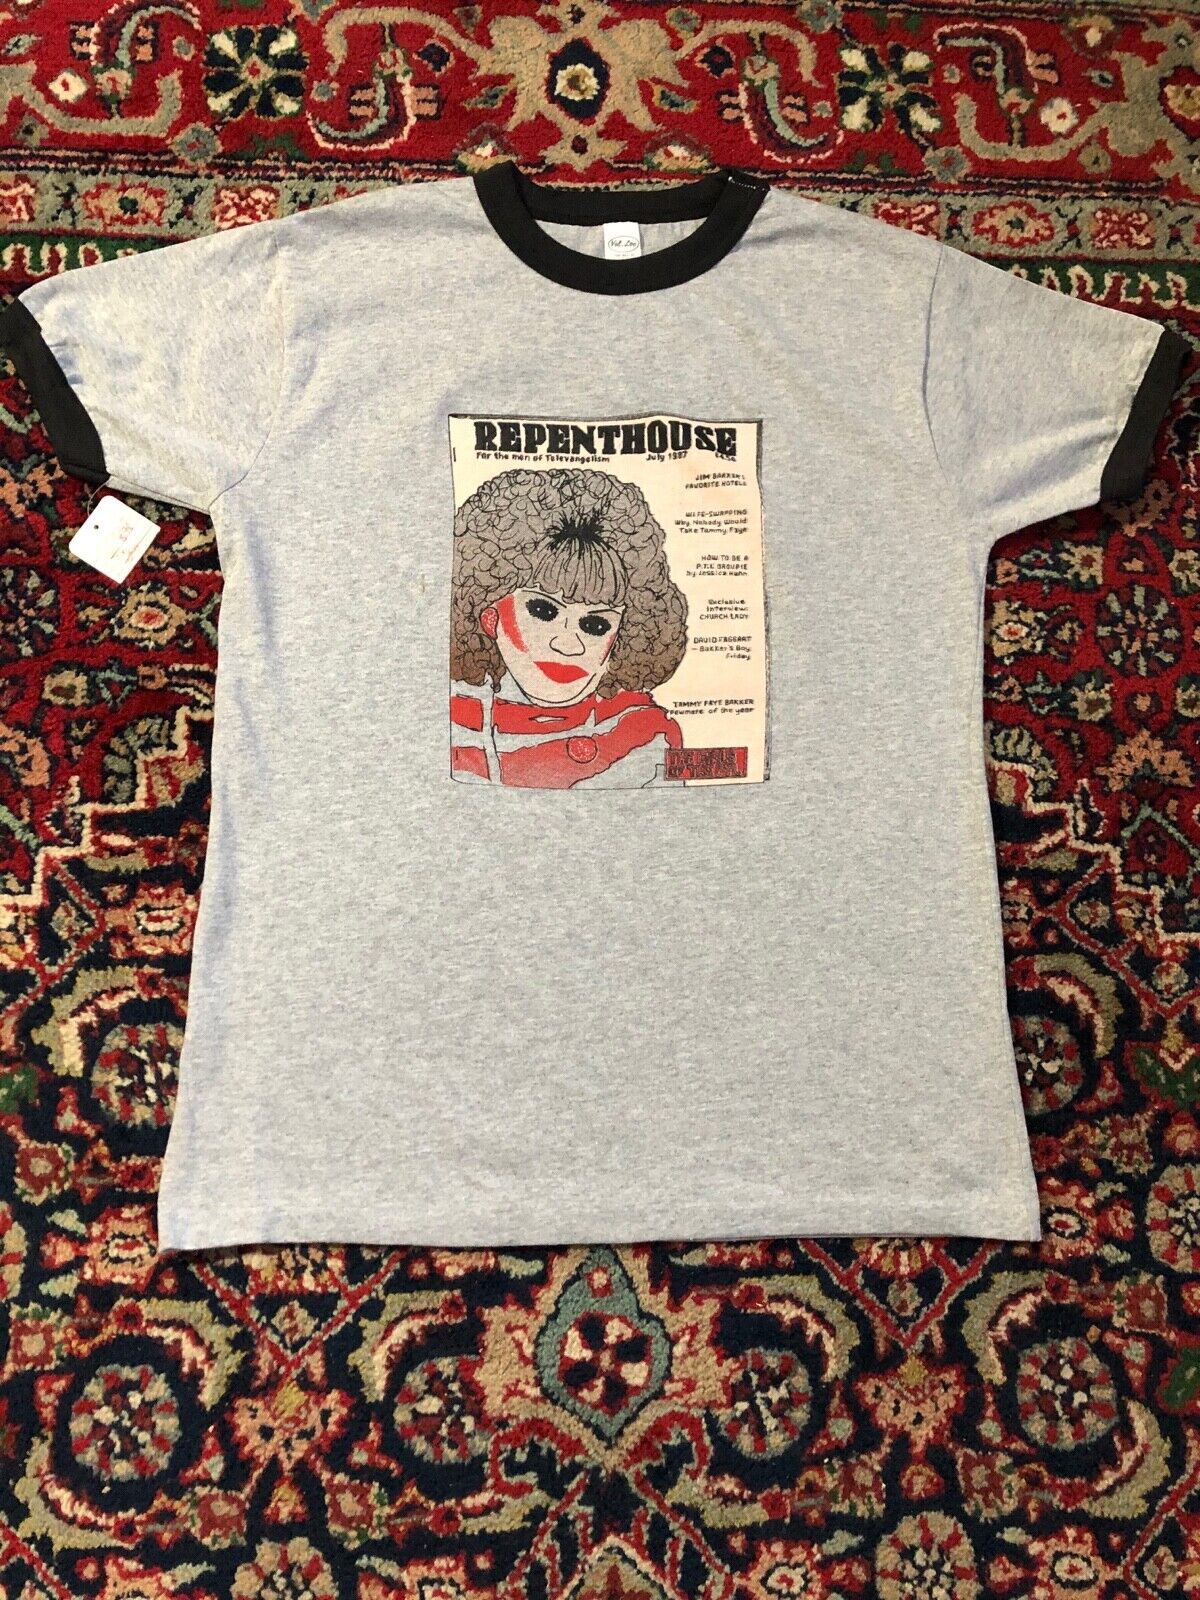 Vintage 80s Beverly Hills Hibillys bootleg Repenthouse sex T shirt size large eBay